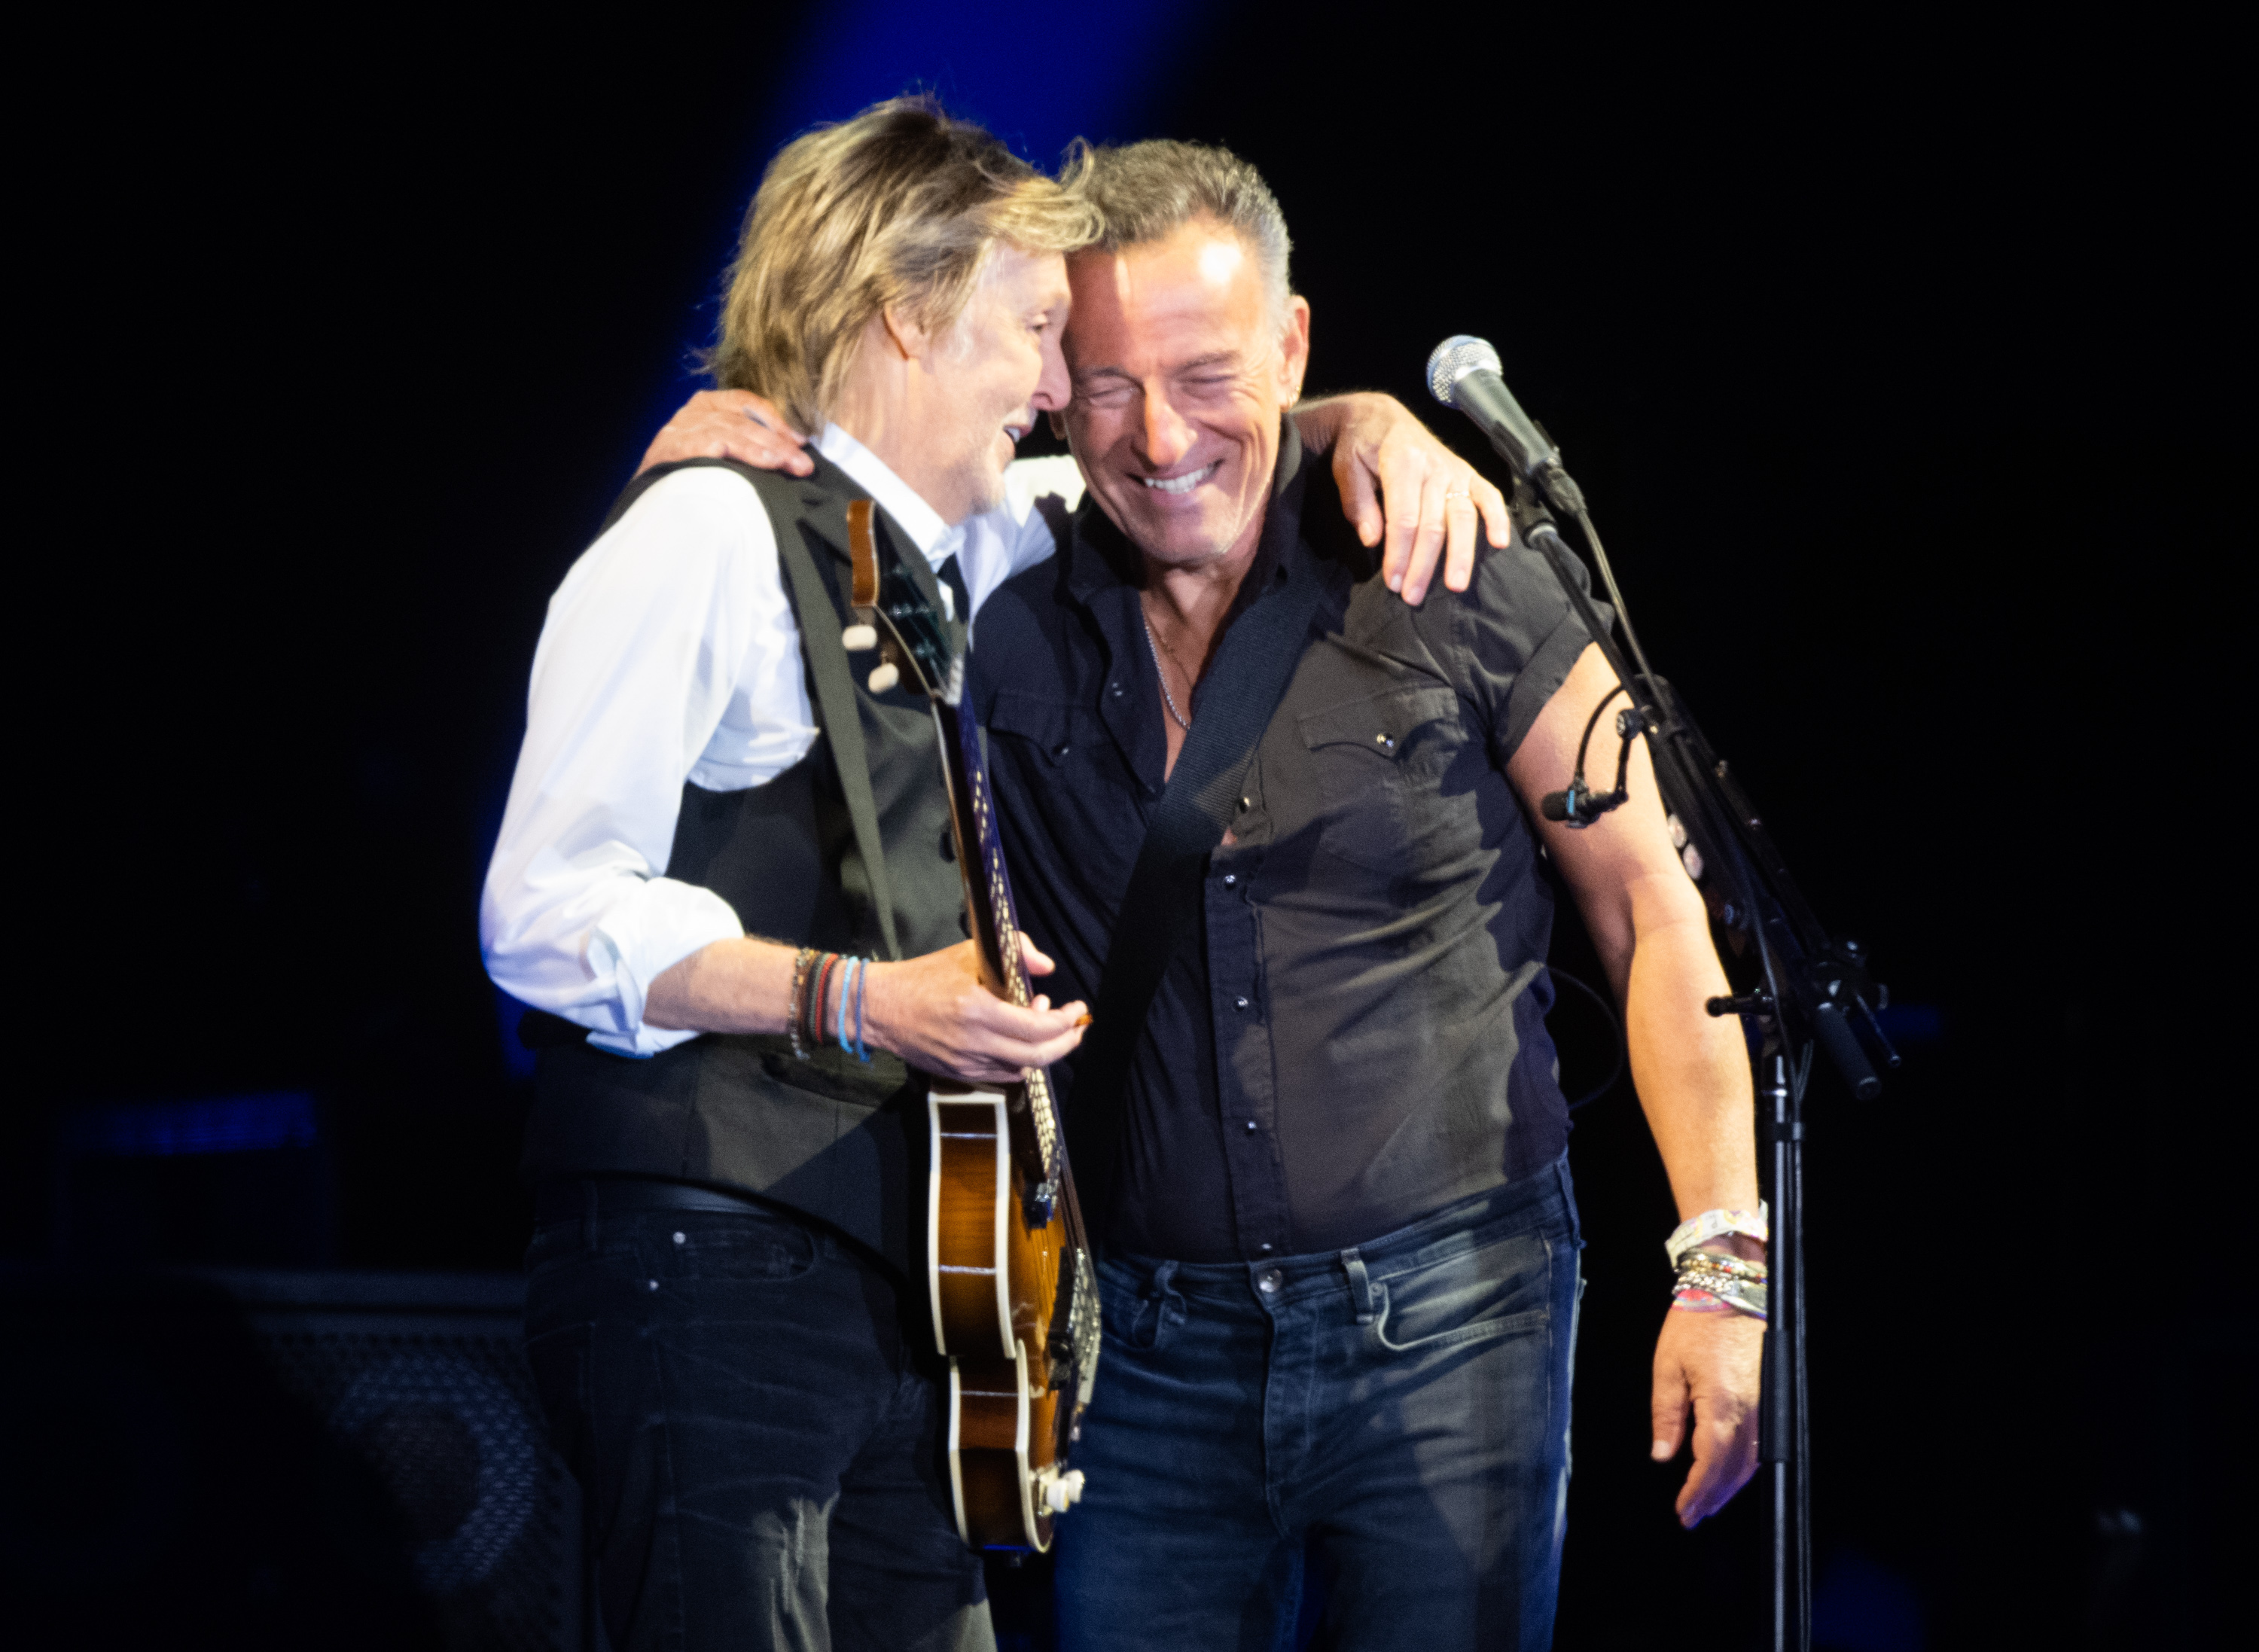 Bruce Springsteen performs with Paul McCartney of The Beatles at the 2022 Glastonbury Festival in England